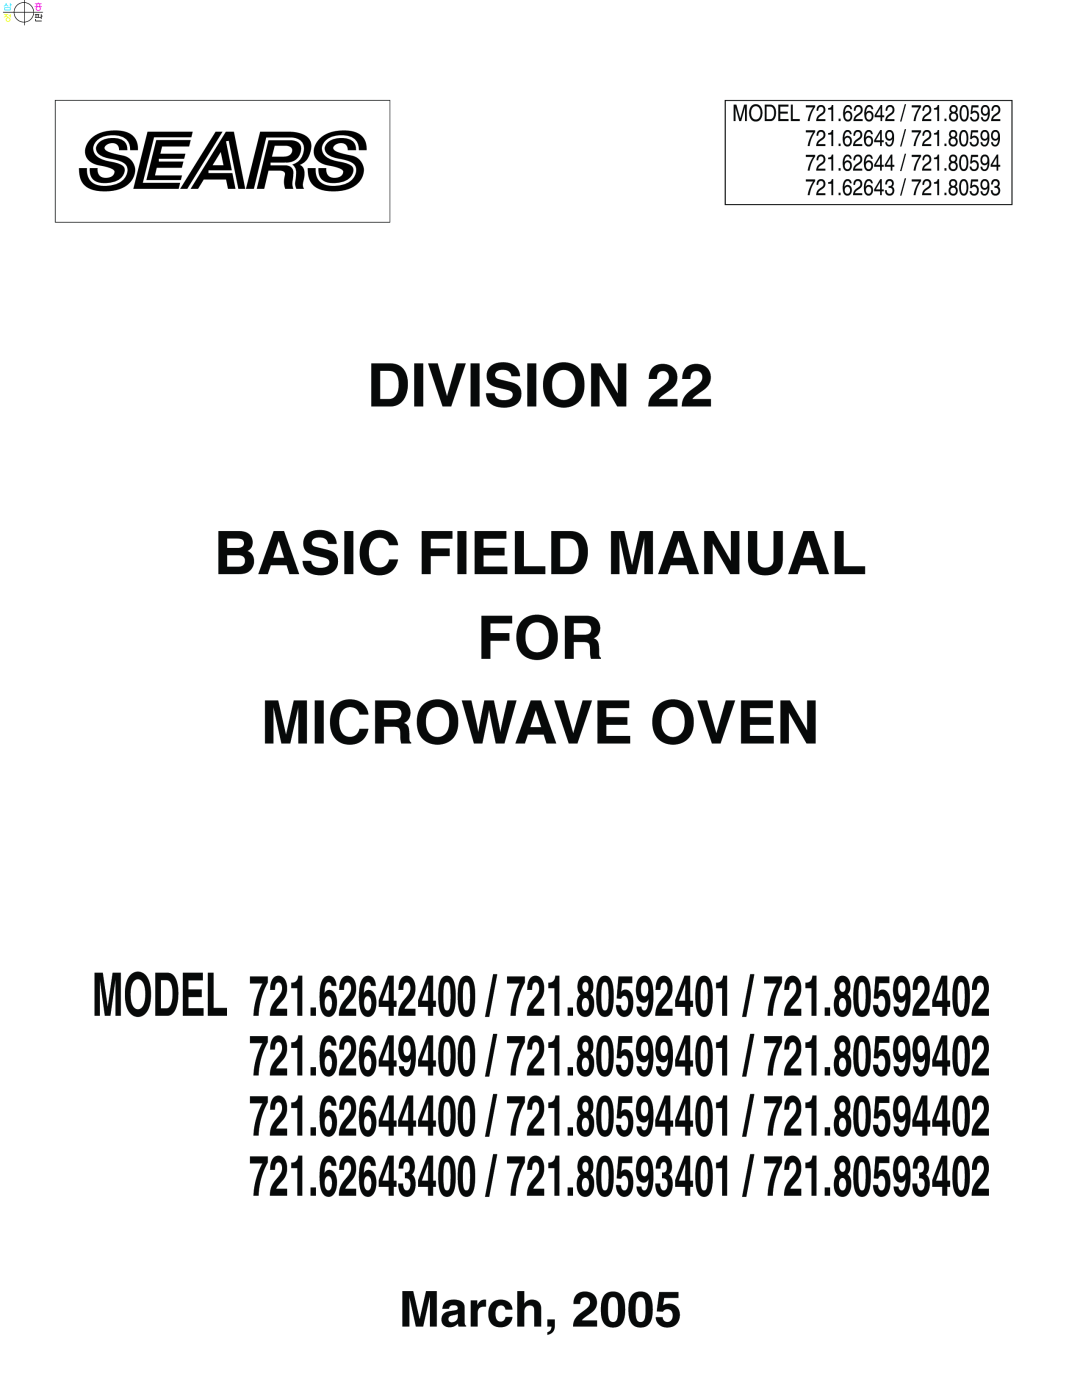 Kenmore 721.805934, 721.805944, 721.805924, 721.626434 manual Division Basic Field Manual For Microwave Oven, March 